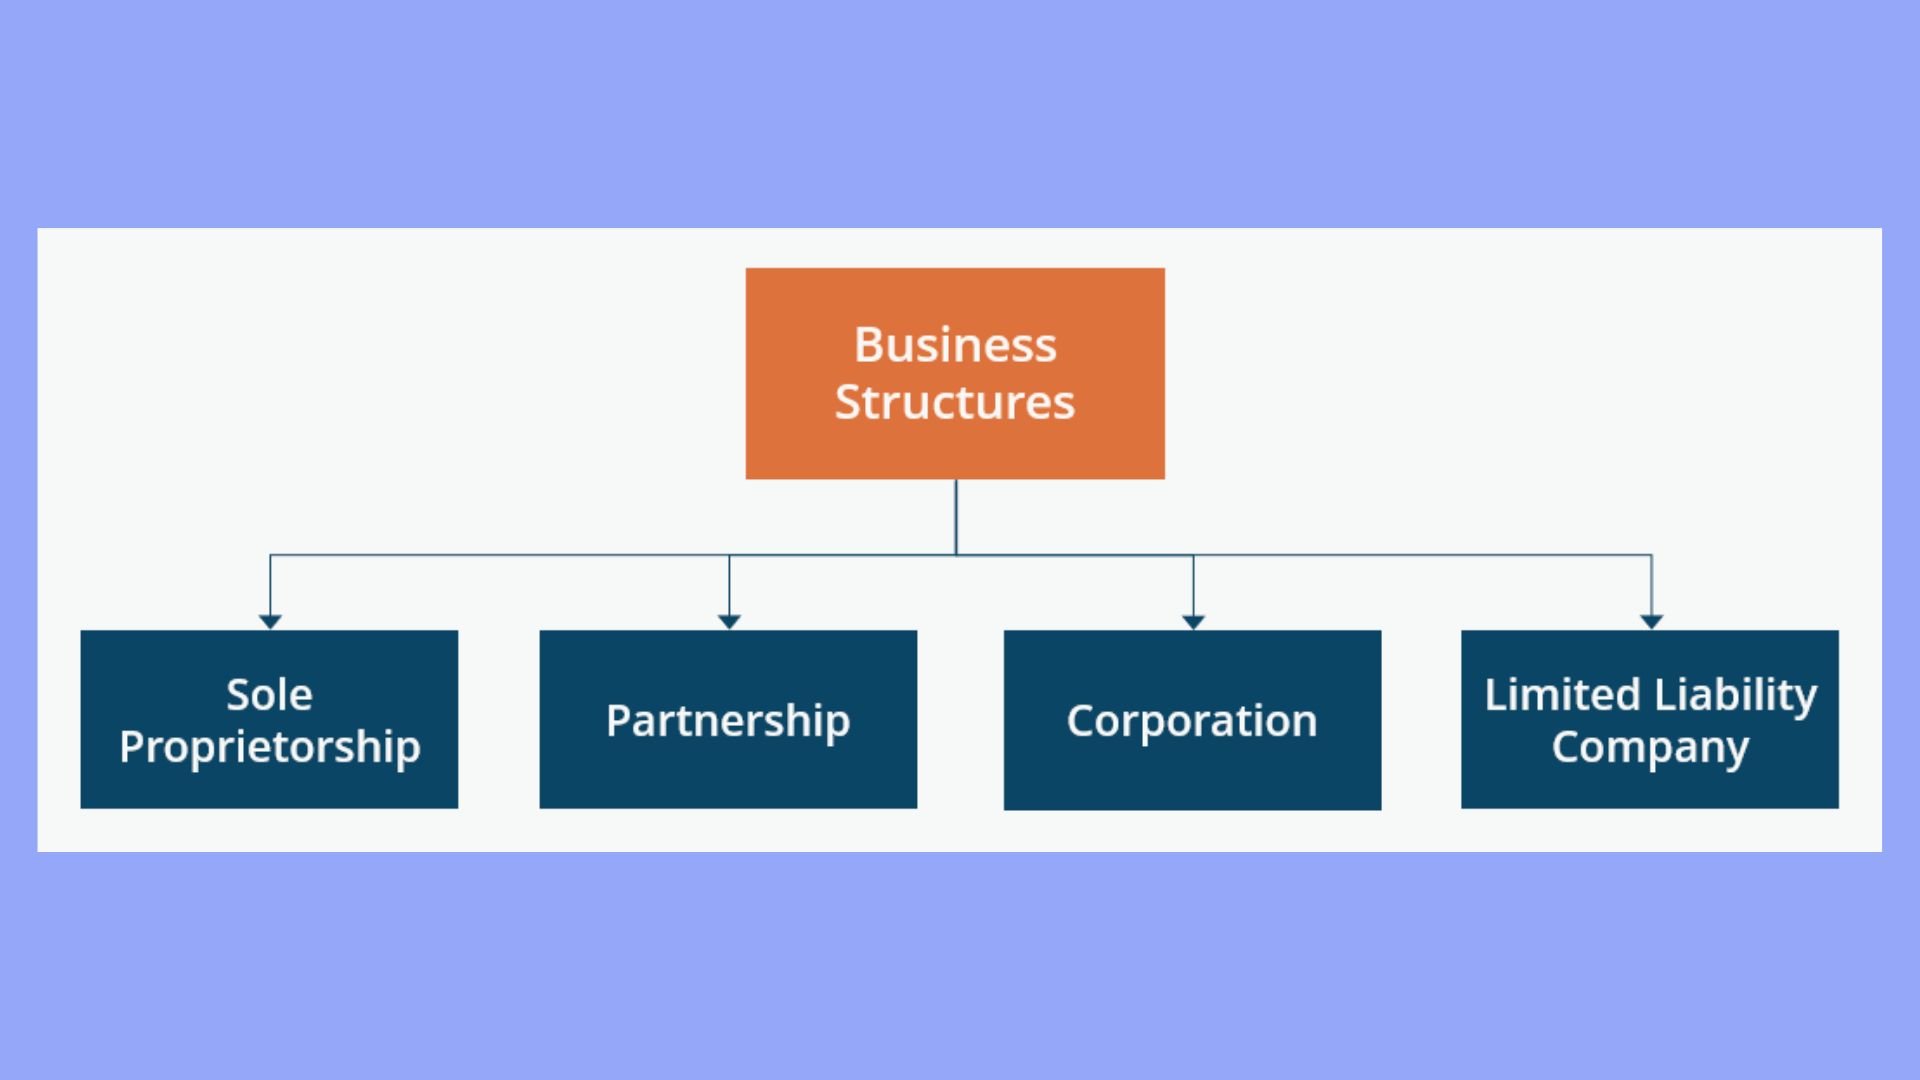 Business structure